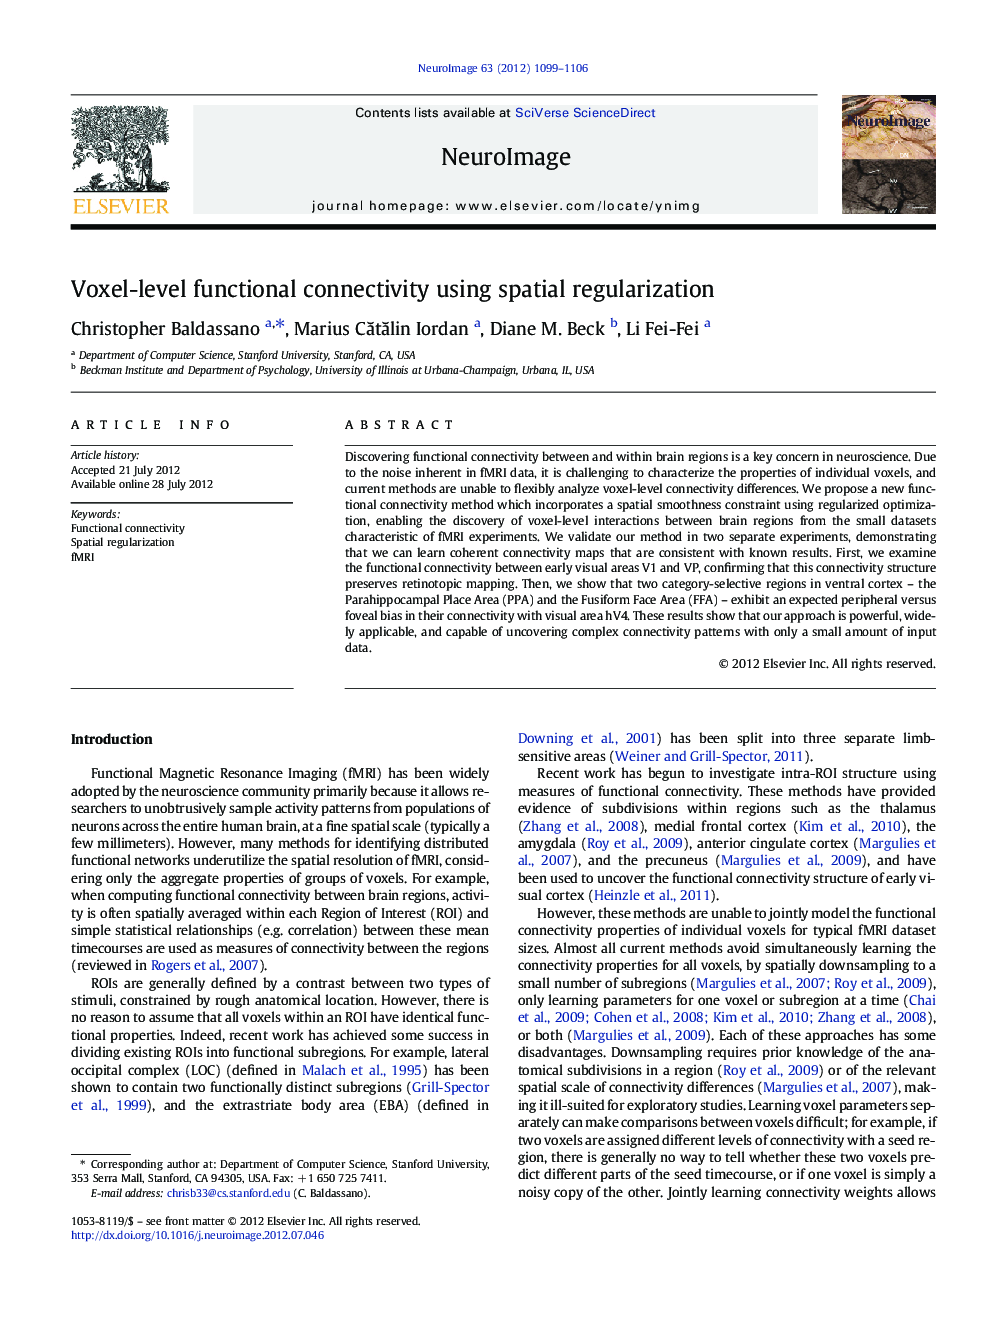 Voxel-level functional connectivity using spatial regularization